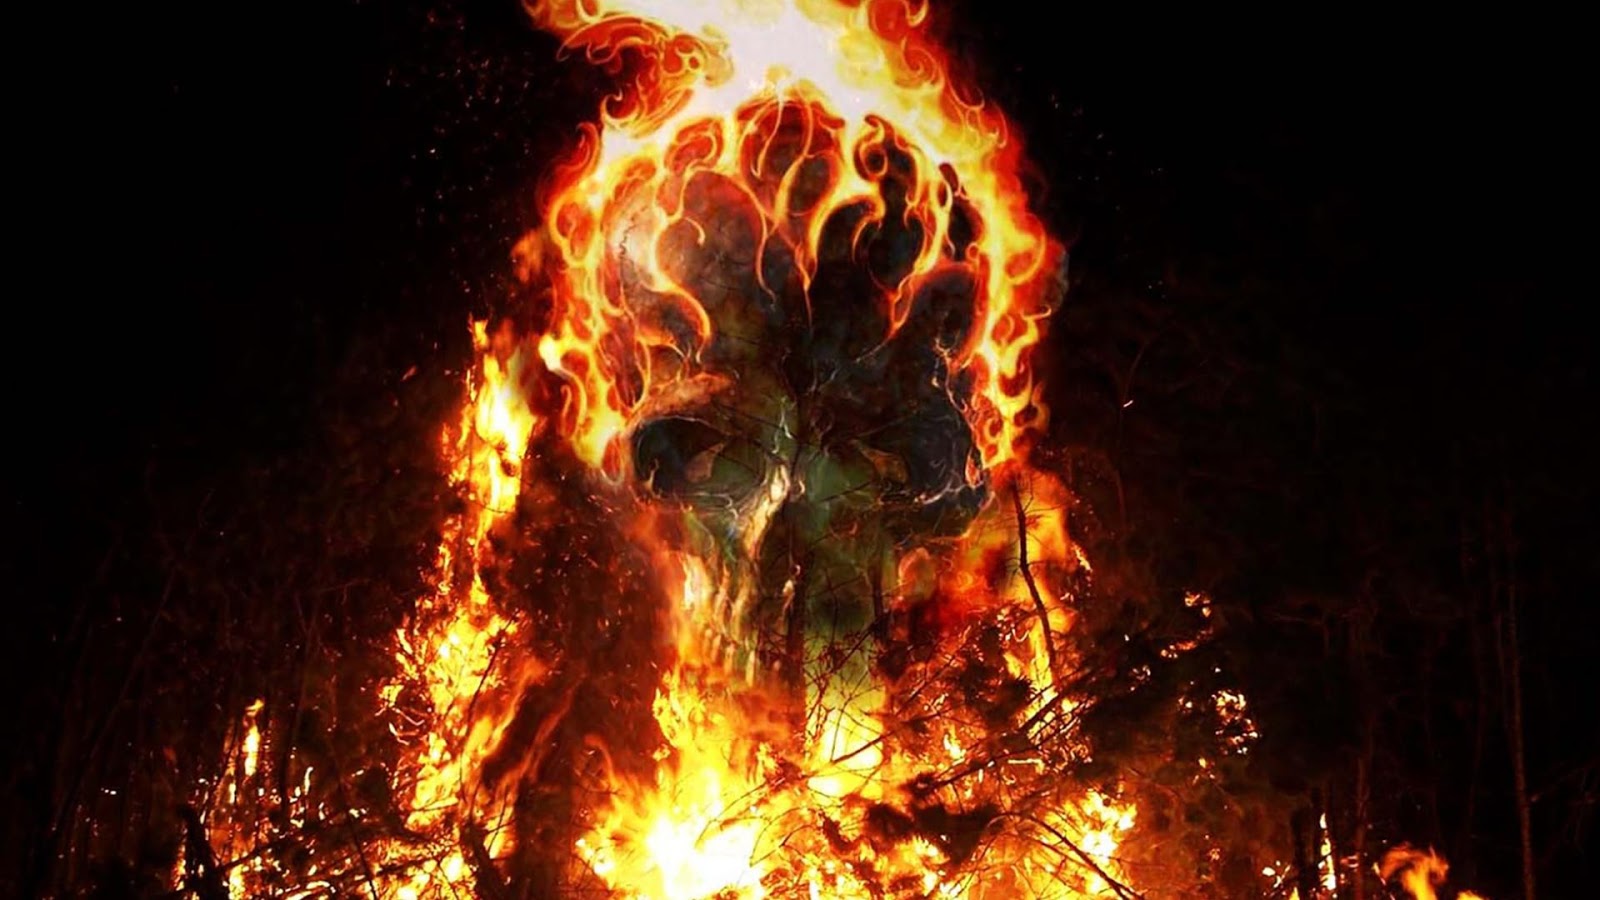 Skulls On Fire Wallpaper Image Amp Pictures Becuo